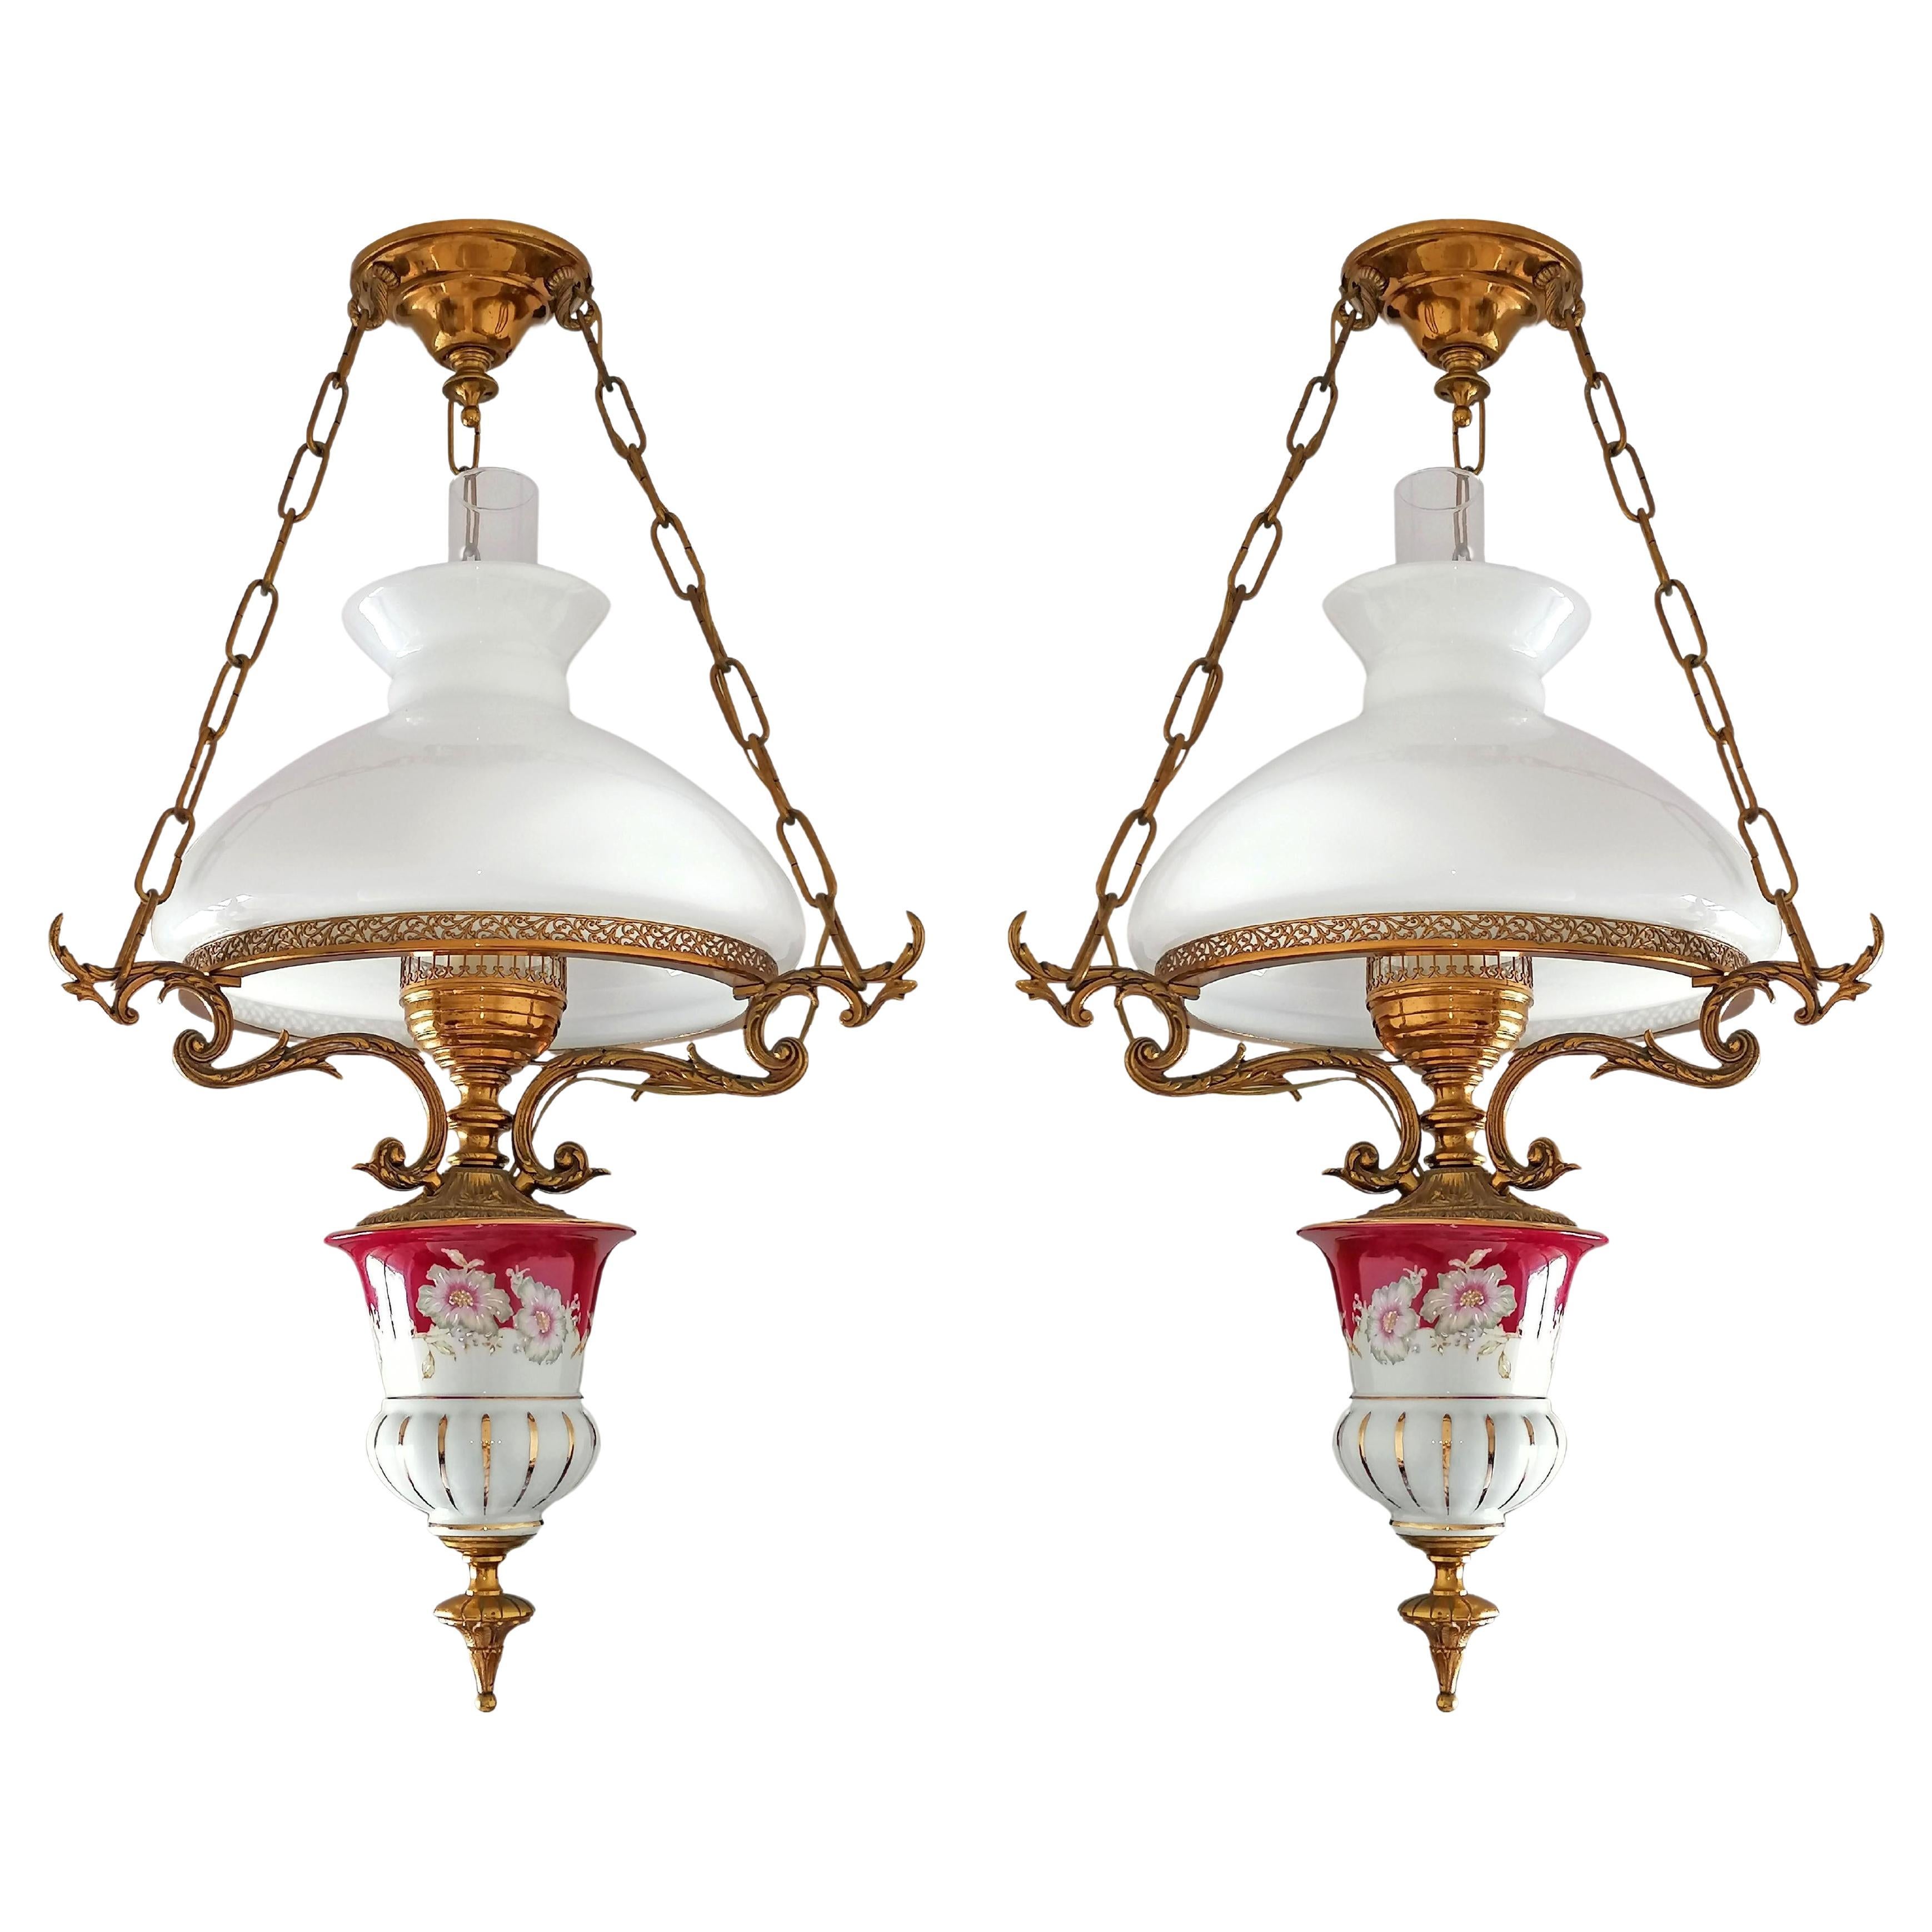 Pair of Large French Chandelier Oil Lamp in Red Pink Porcelain and Gilt Bronze